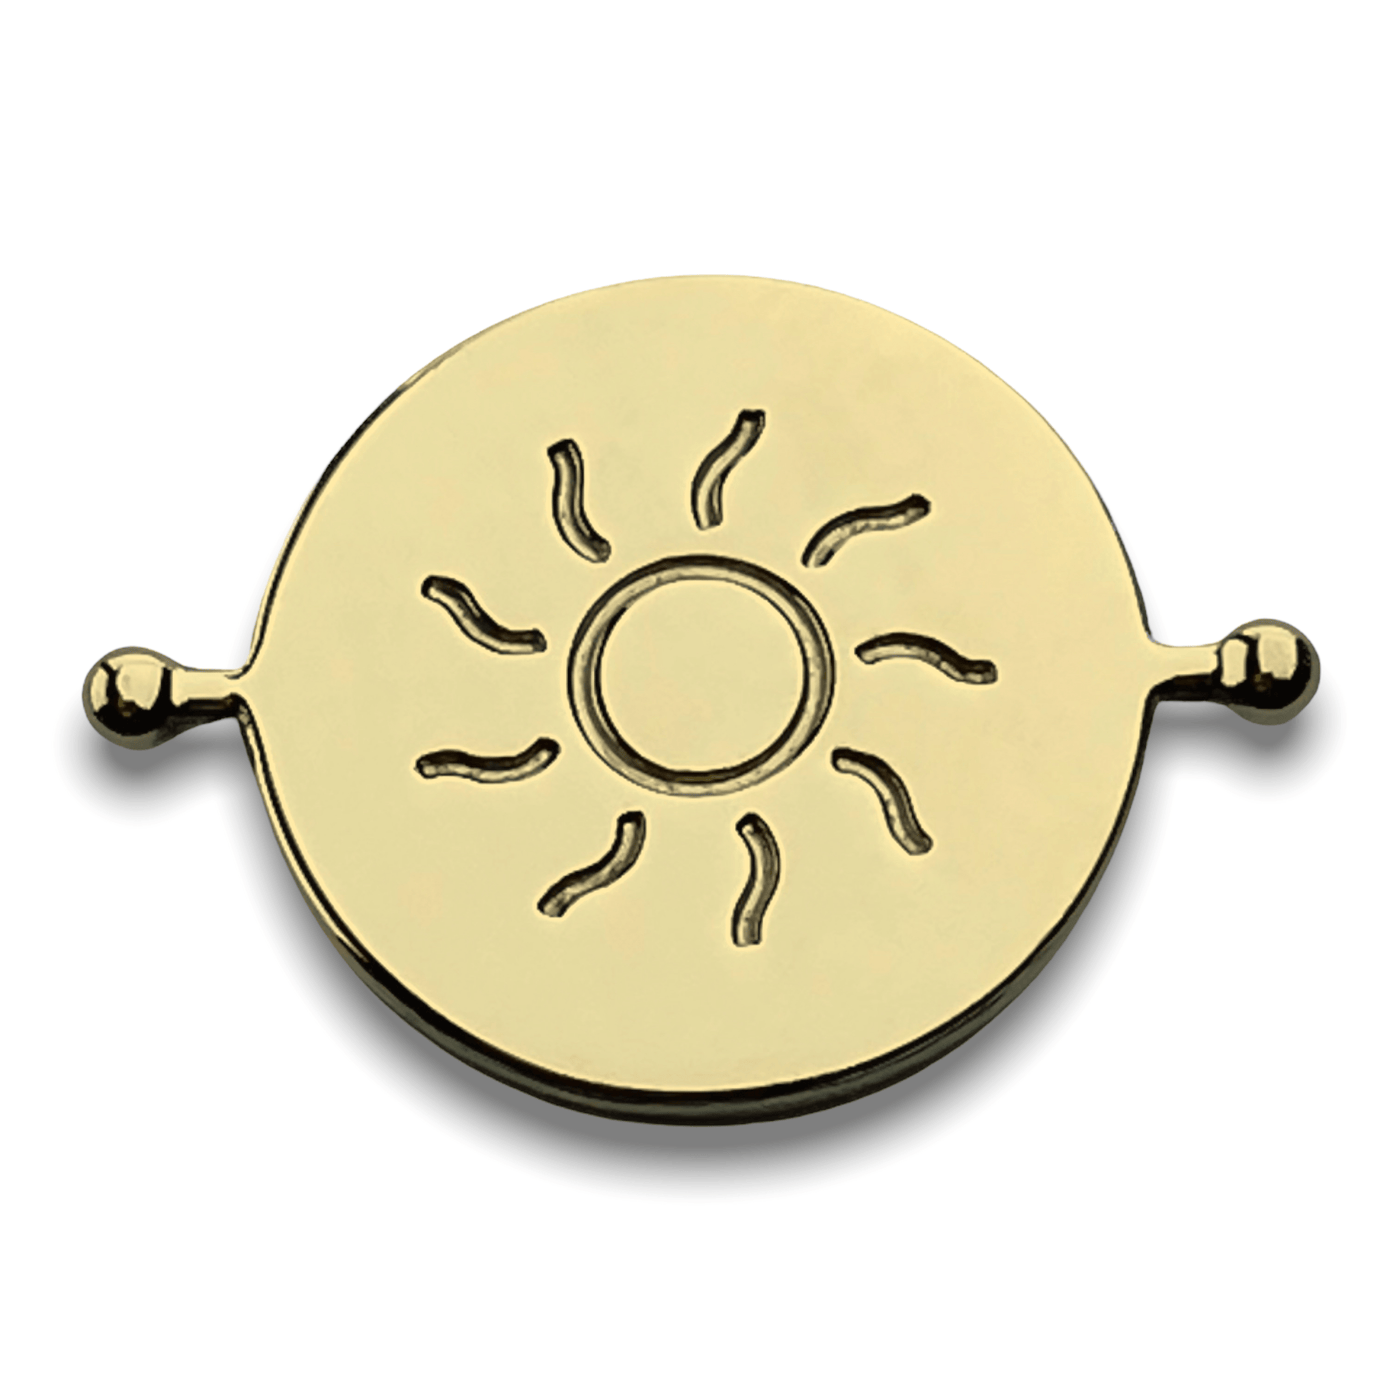 Sun Symbol Element (spin to combine)